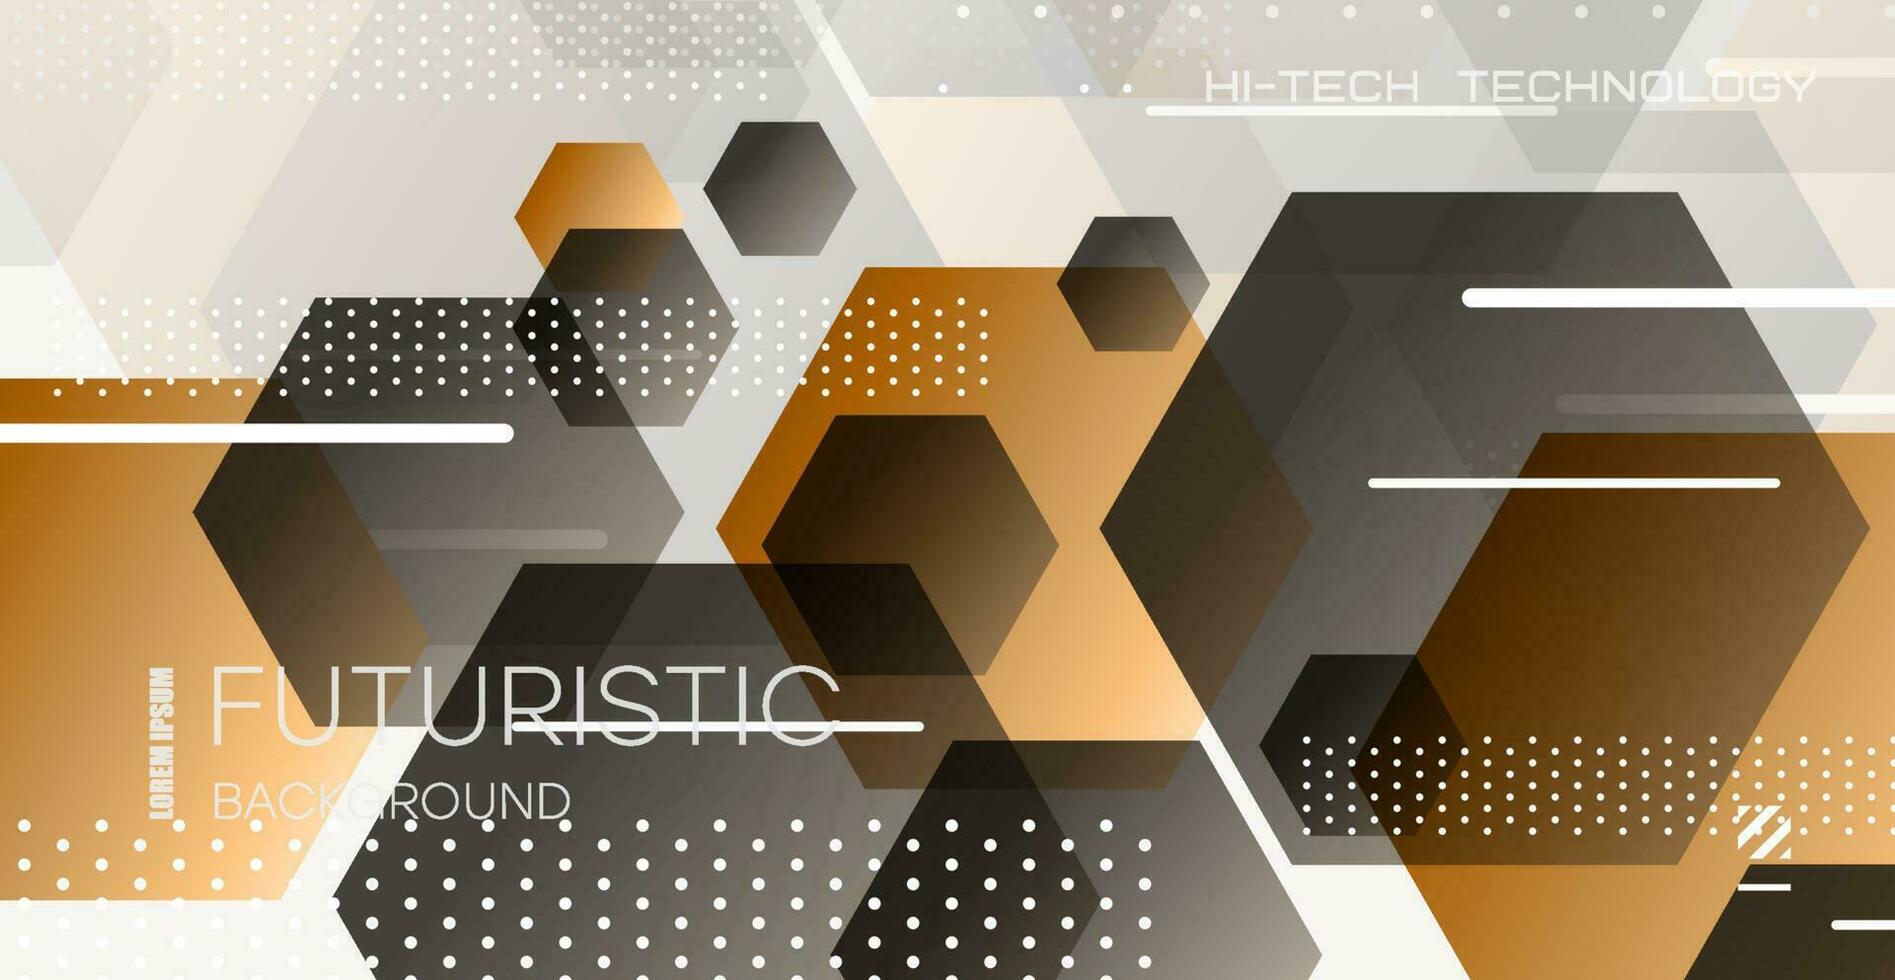 Abstract background with hexagonal shapes. Colorful gradient triangle design. Low poly banner in the shape of a hexagon. vector